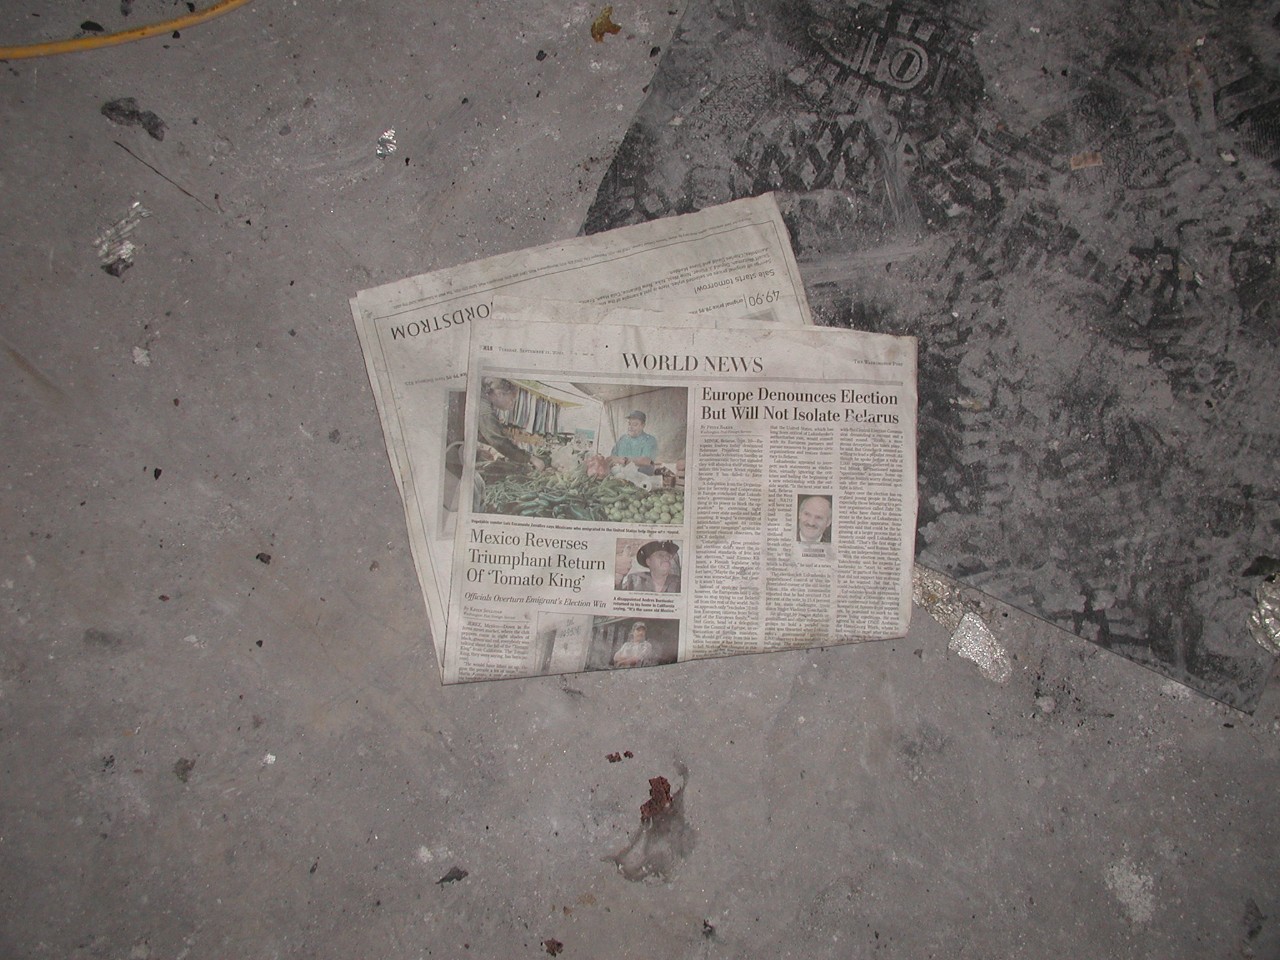 A newspaper dated September 11, 2001 left behind by the crews clearing the Navy Command Center spaces, 10 October 2001